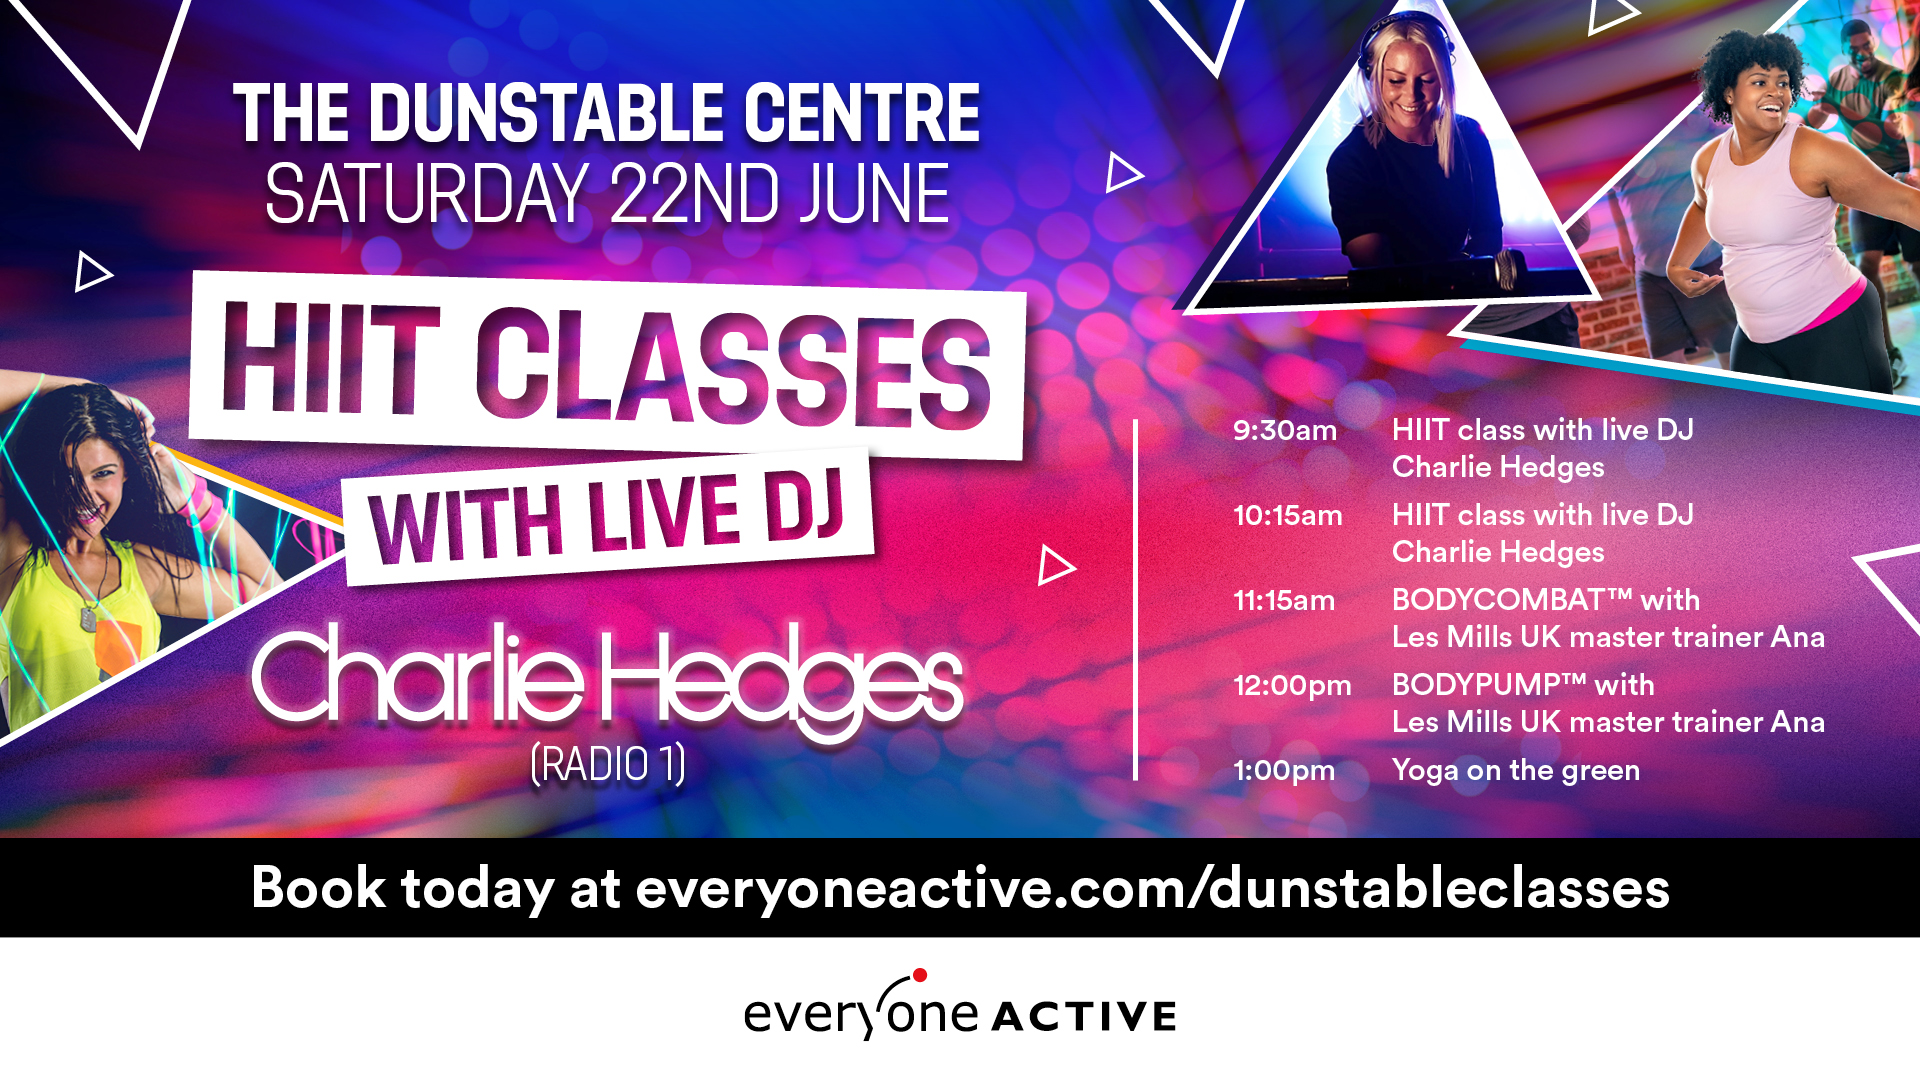 Everyone Active - The Dunstable Centre